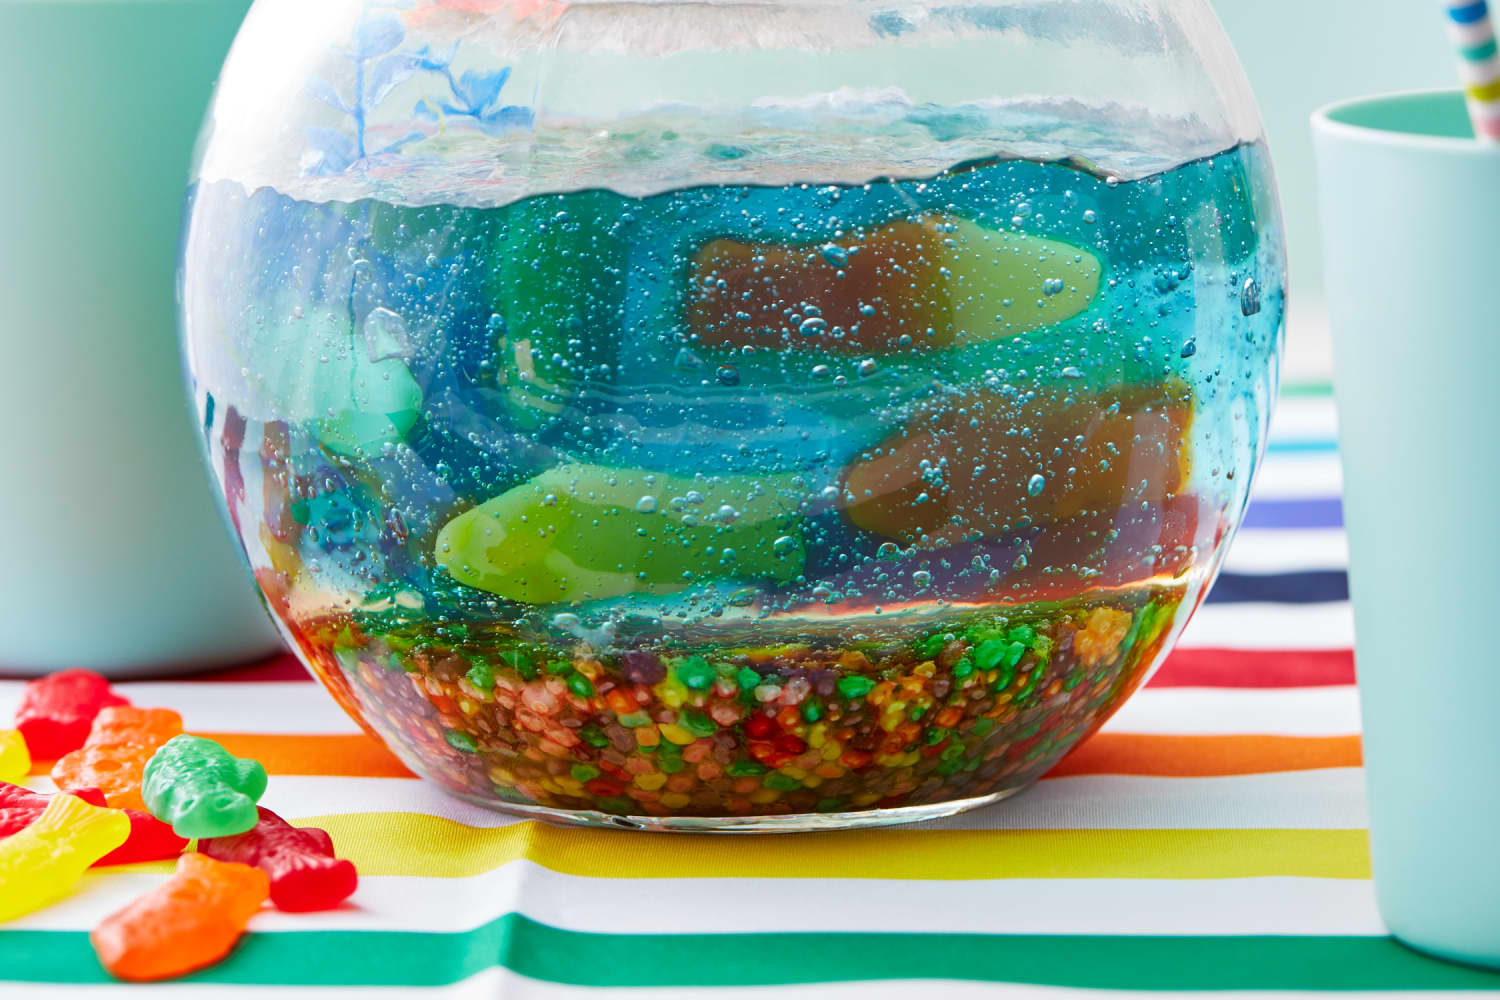 The Best Candy Is: Nerds, the Gravel at the Bottom of Your Fish Tank